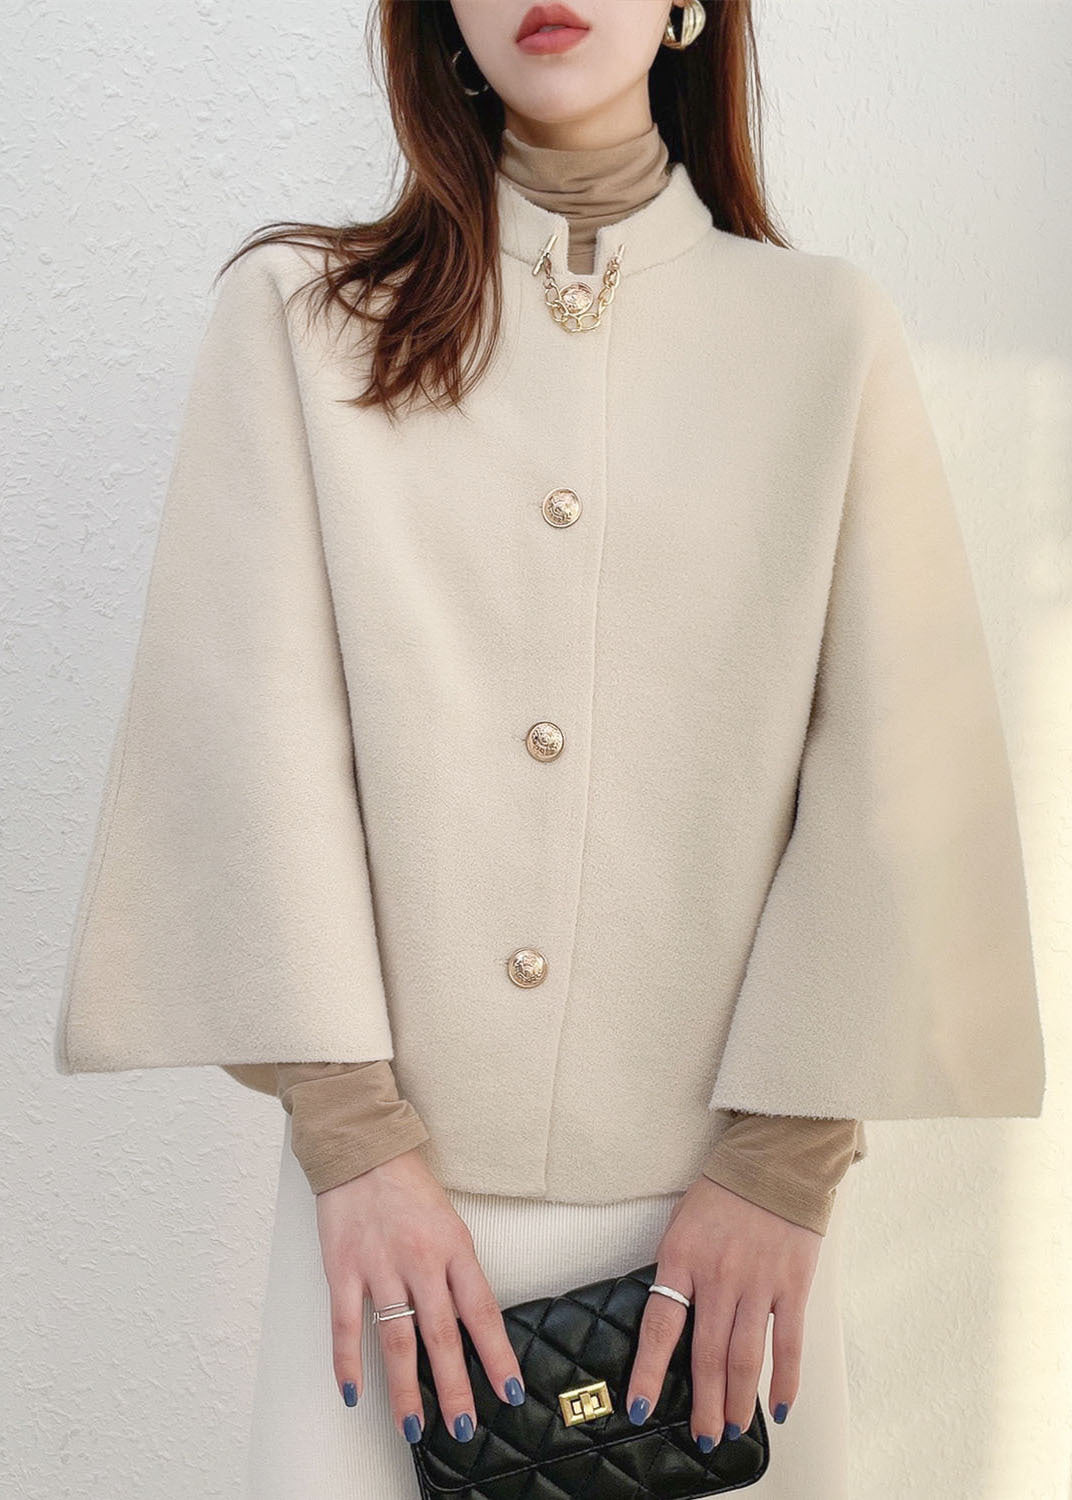 Solid White Thick Woolen Cloak Coats Stand Collar Button Fall